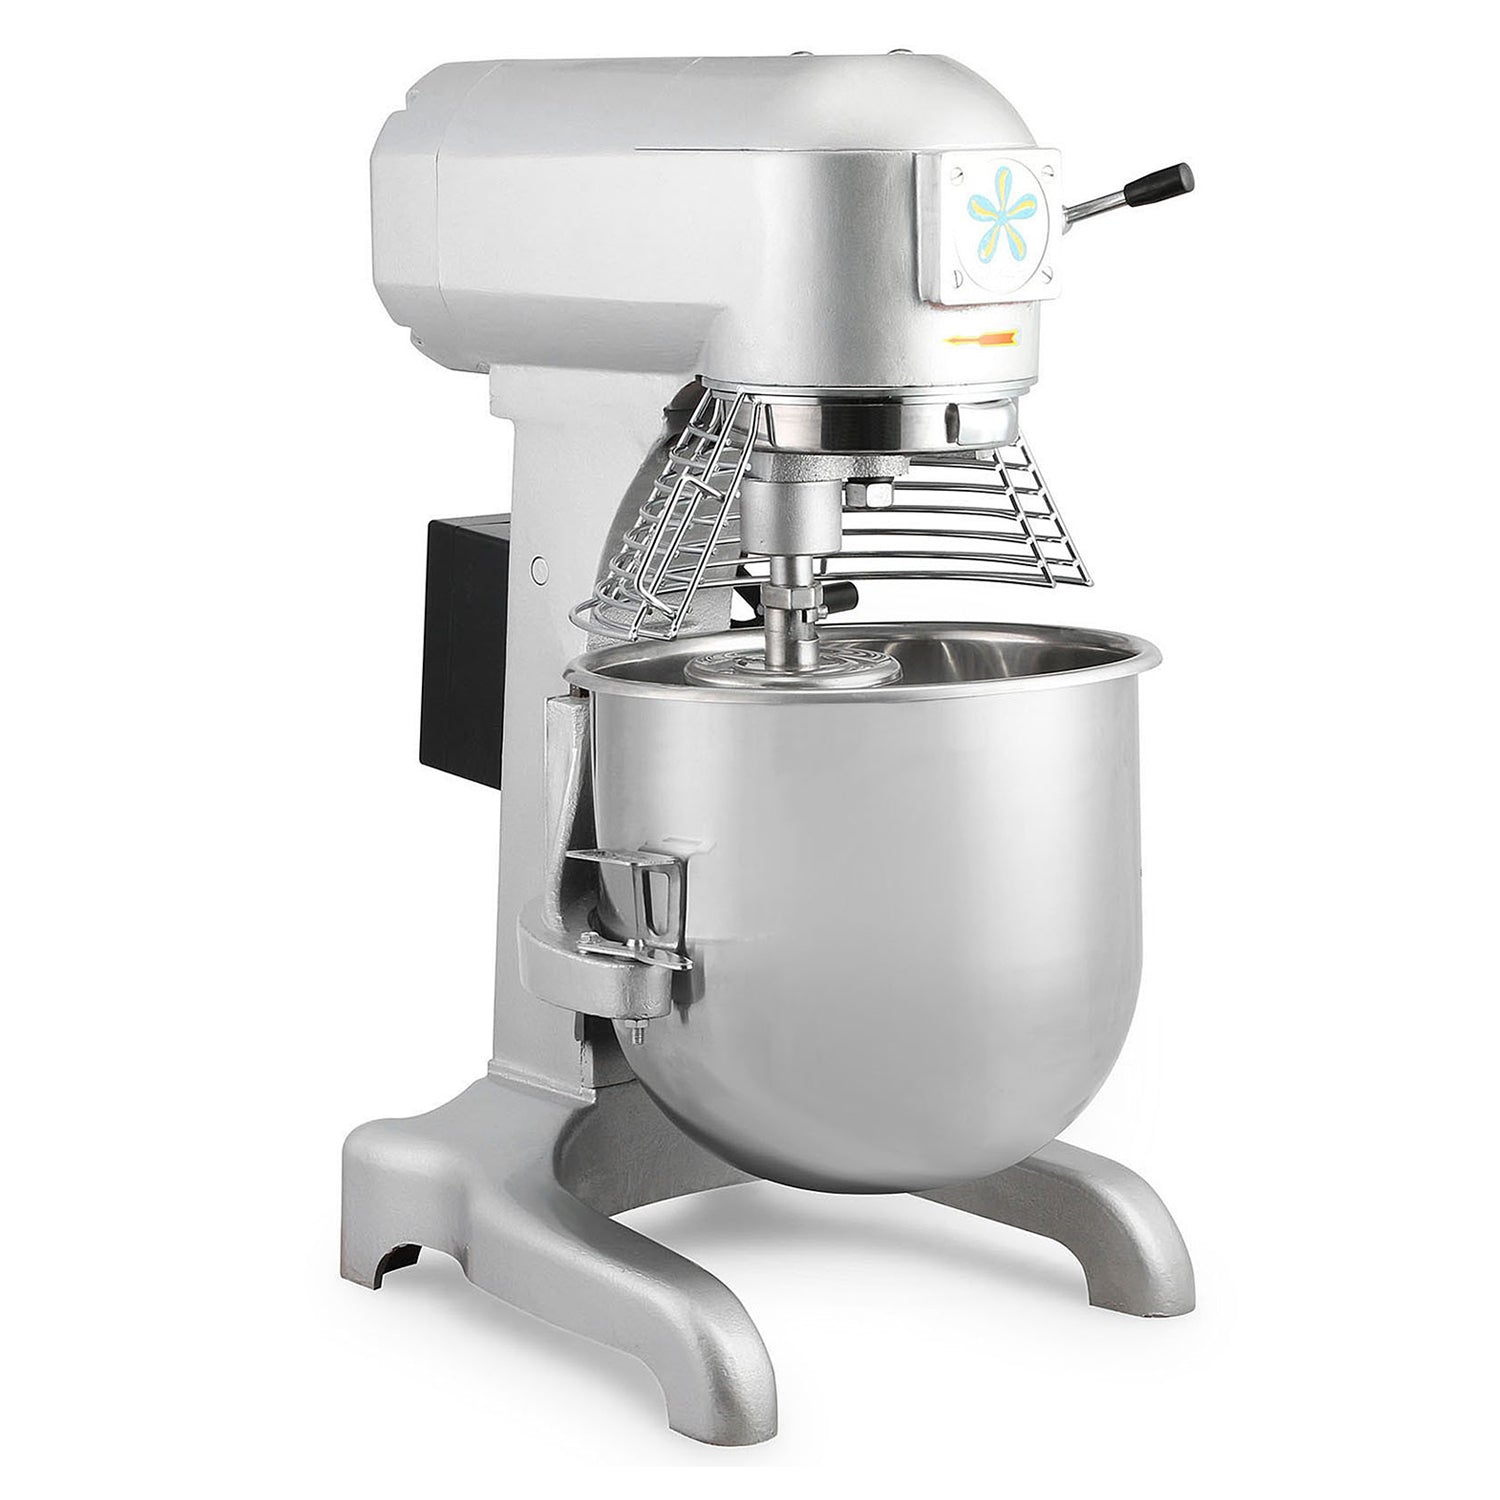 GR-30QT Food Mixer | Commercial Planetary Mixer with Dough Hook, Wire Whip & Beater | 30QT